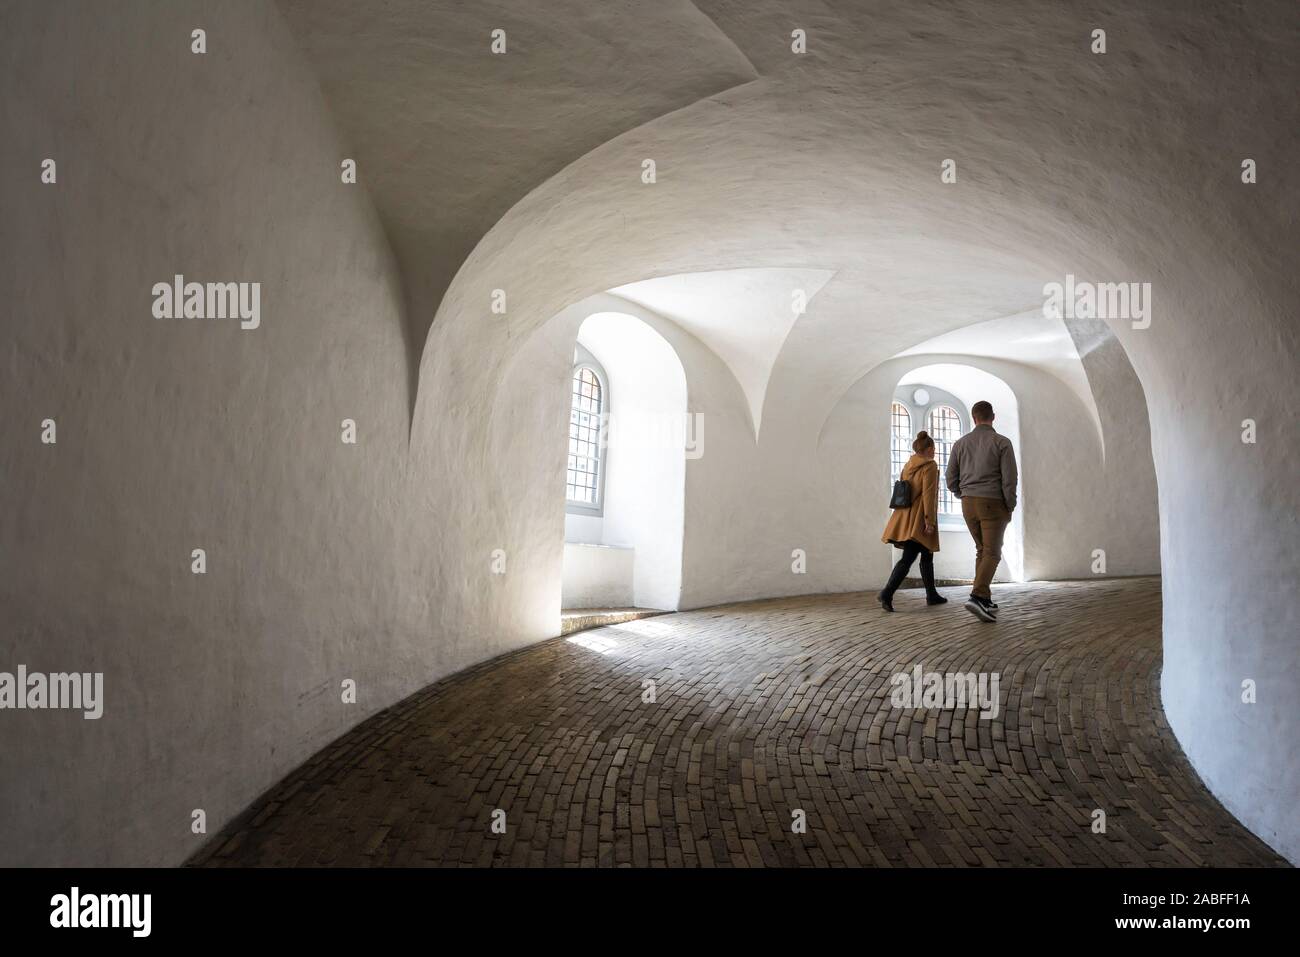 Young couple walking, view of young people ascending the equestrian staircase or helical ramp inside the Rundetaarn in central Copenhagen, Denmark. Stock Photo